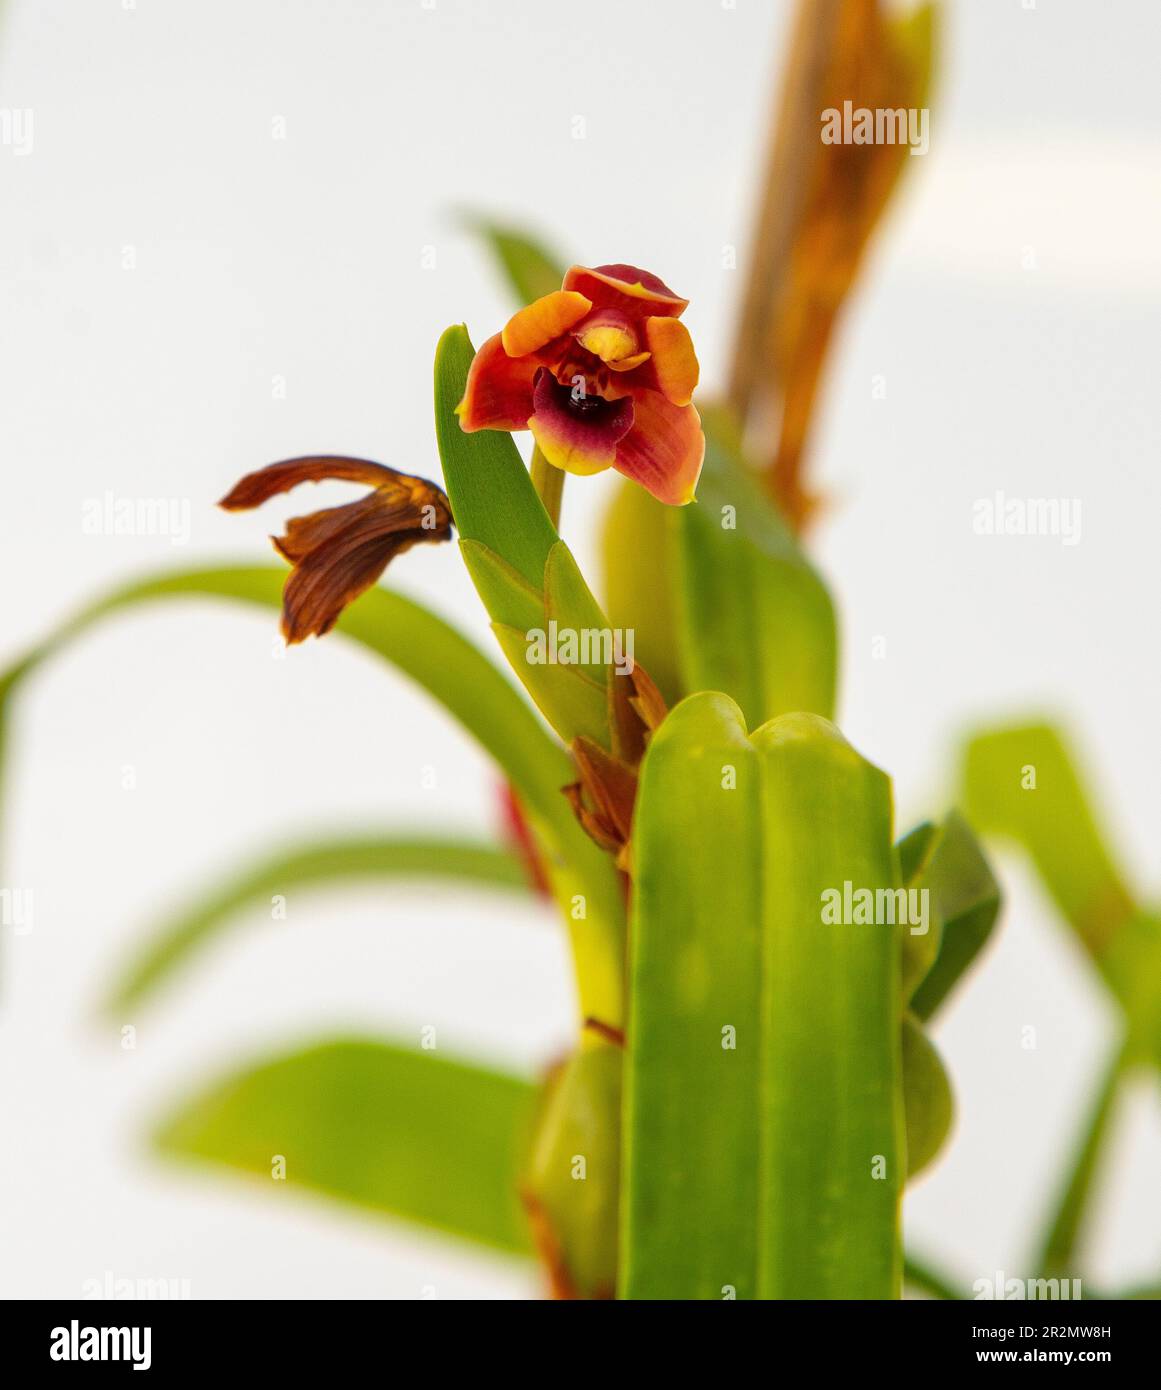 Maxillaria Variabilis Red orange yellow flower buds. Phalaenopsis flowering of a rare of orchids. White background. Big flowers pot garden cattleya orchidaceae family. Stock Photo